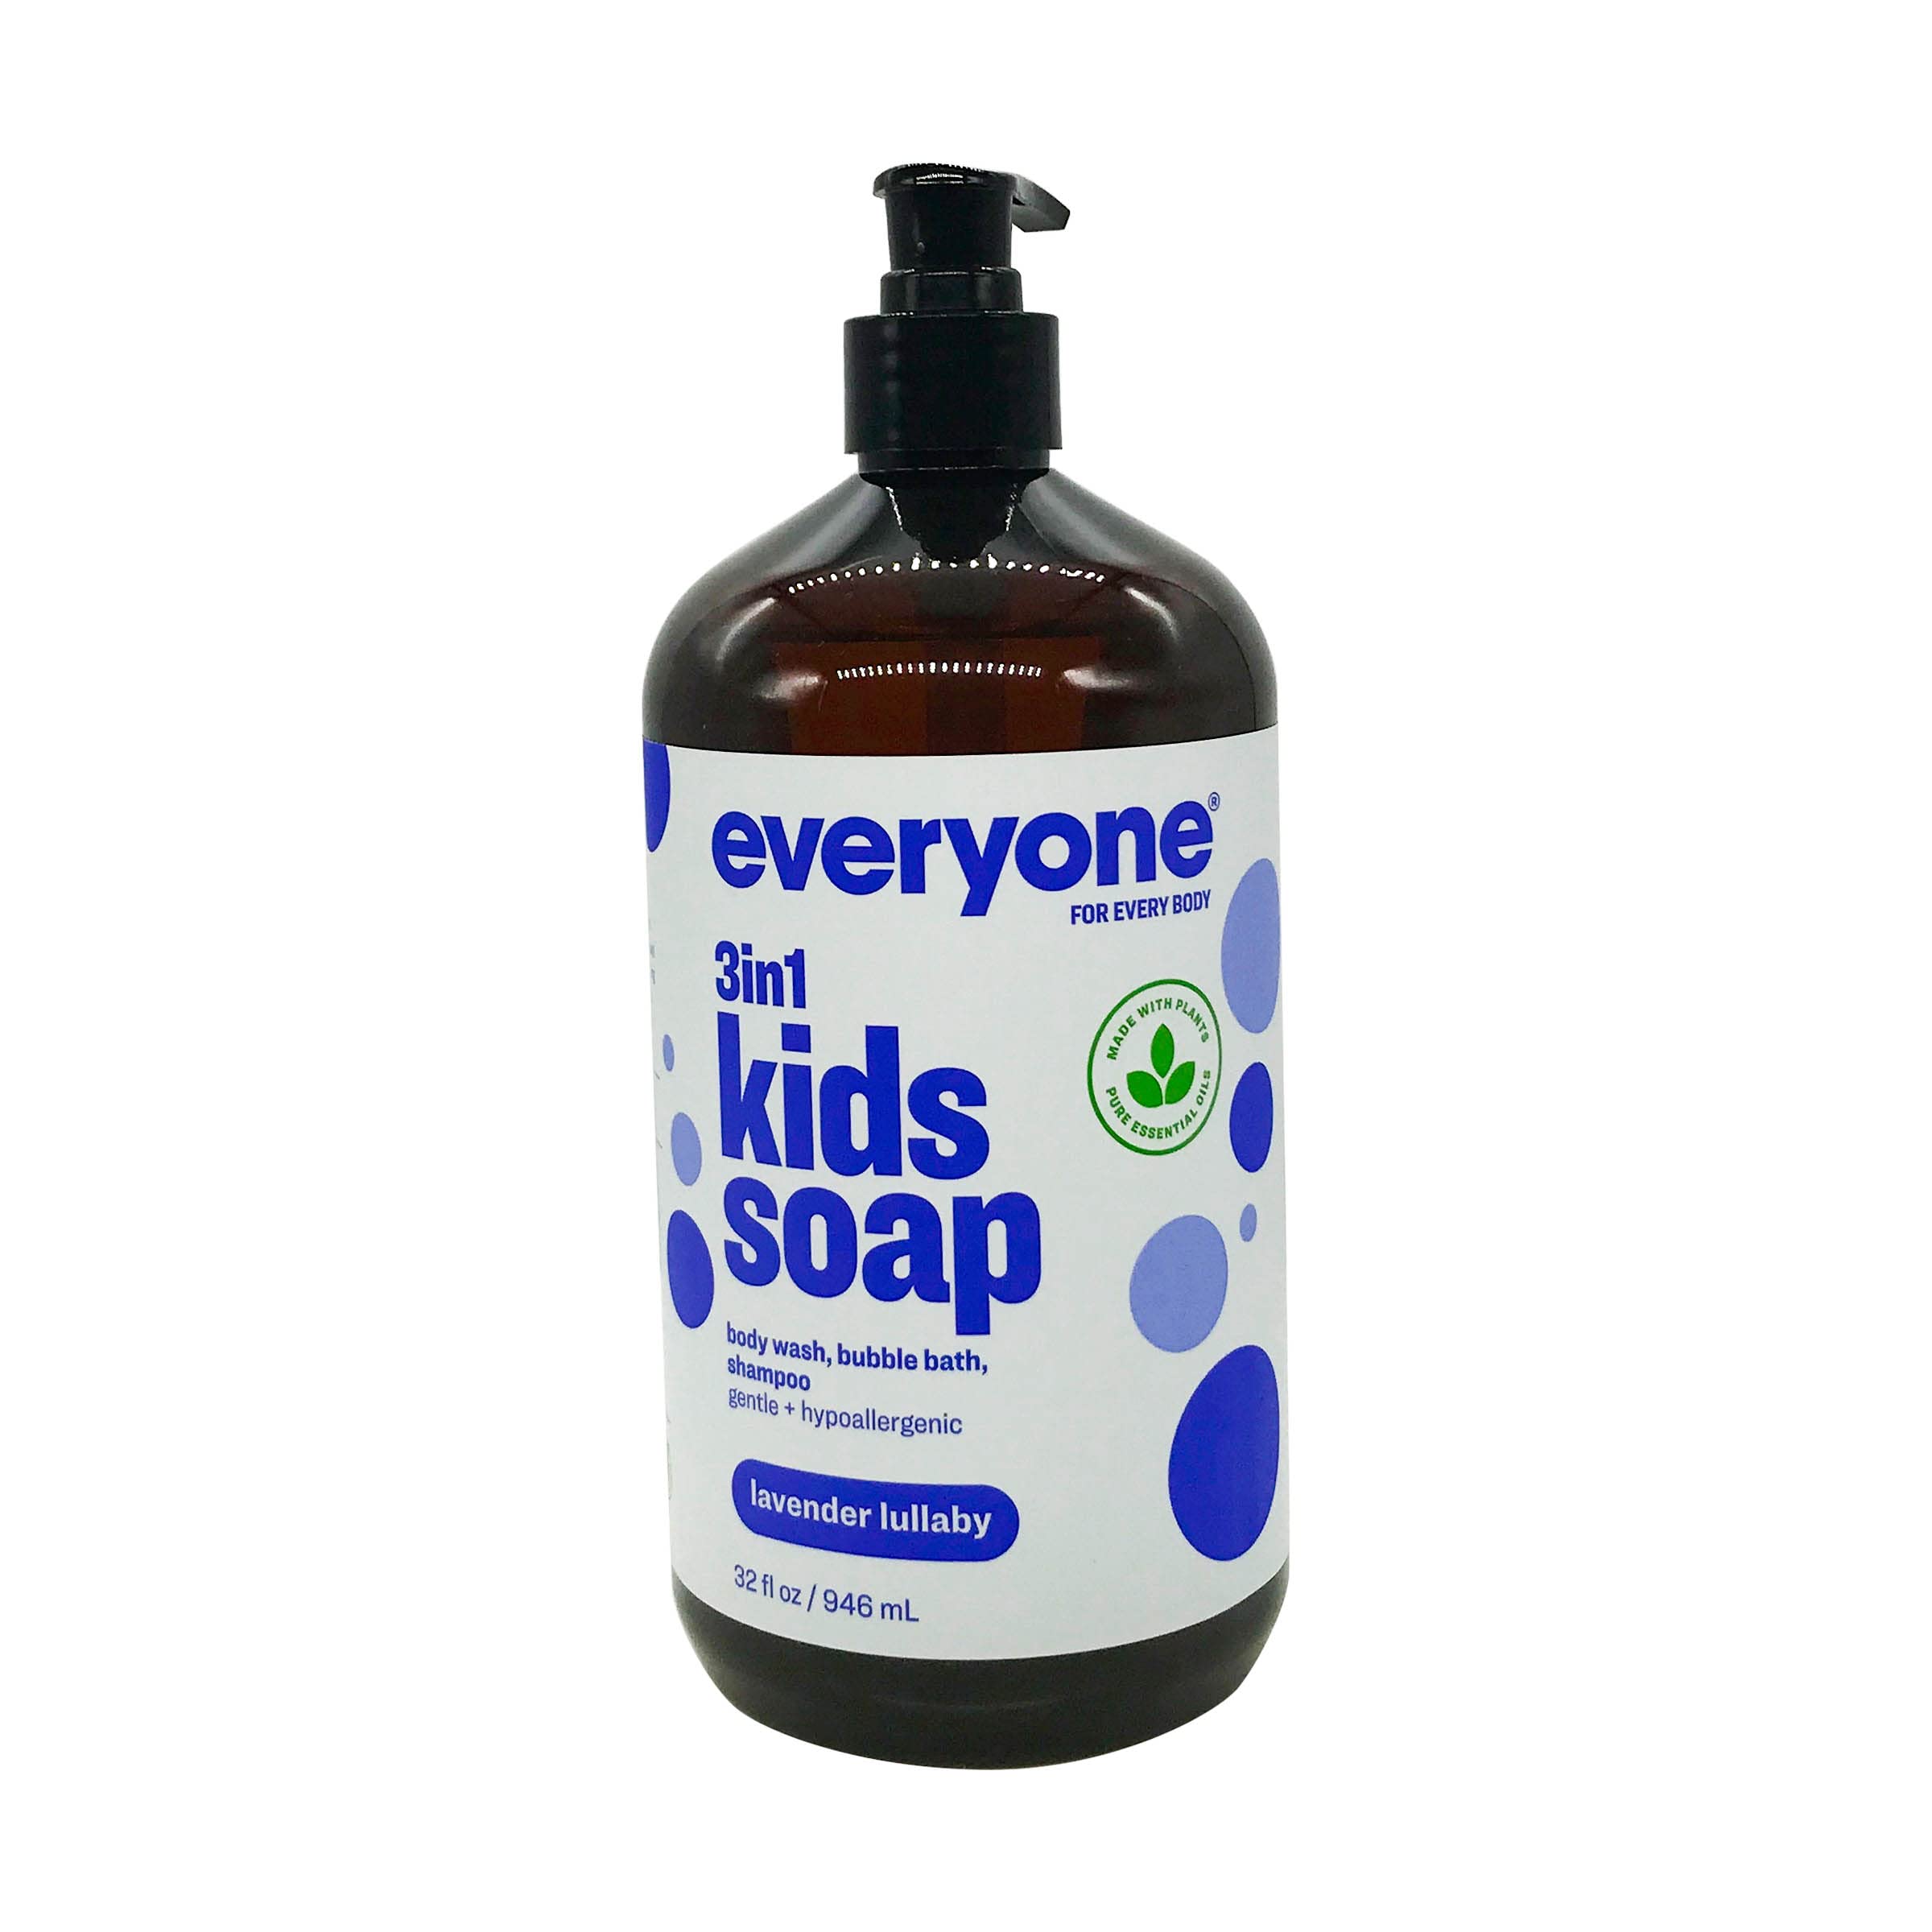 Everyone 3-in-1 Soap for Every Kid Safe, Gentle and Natural Shampoo, Body Wash, and Bubble Bath, Lavender Lullaby